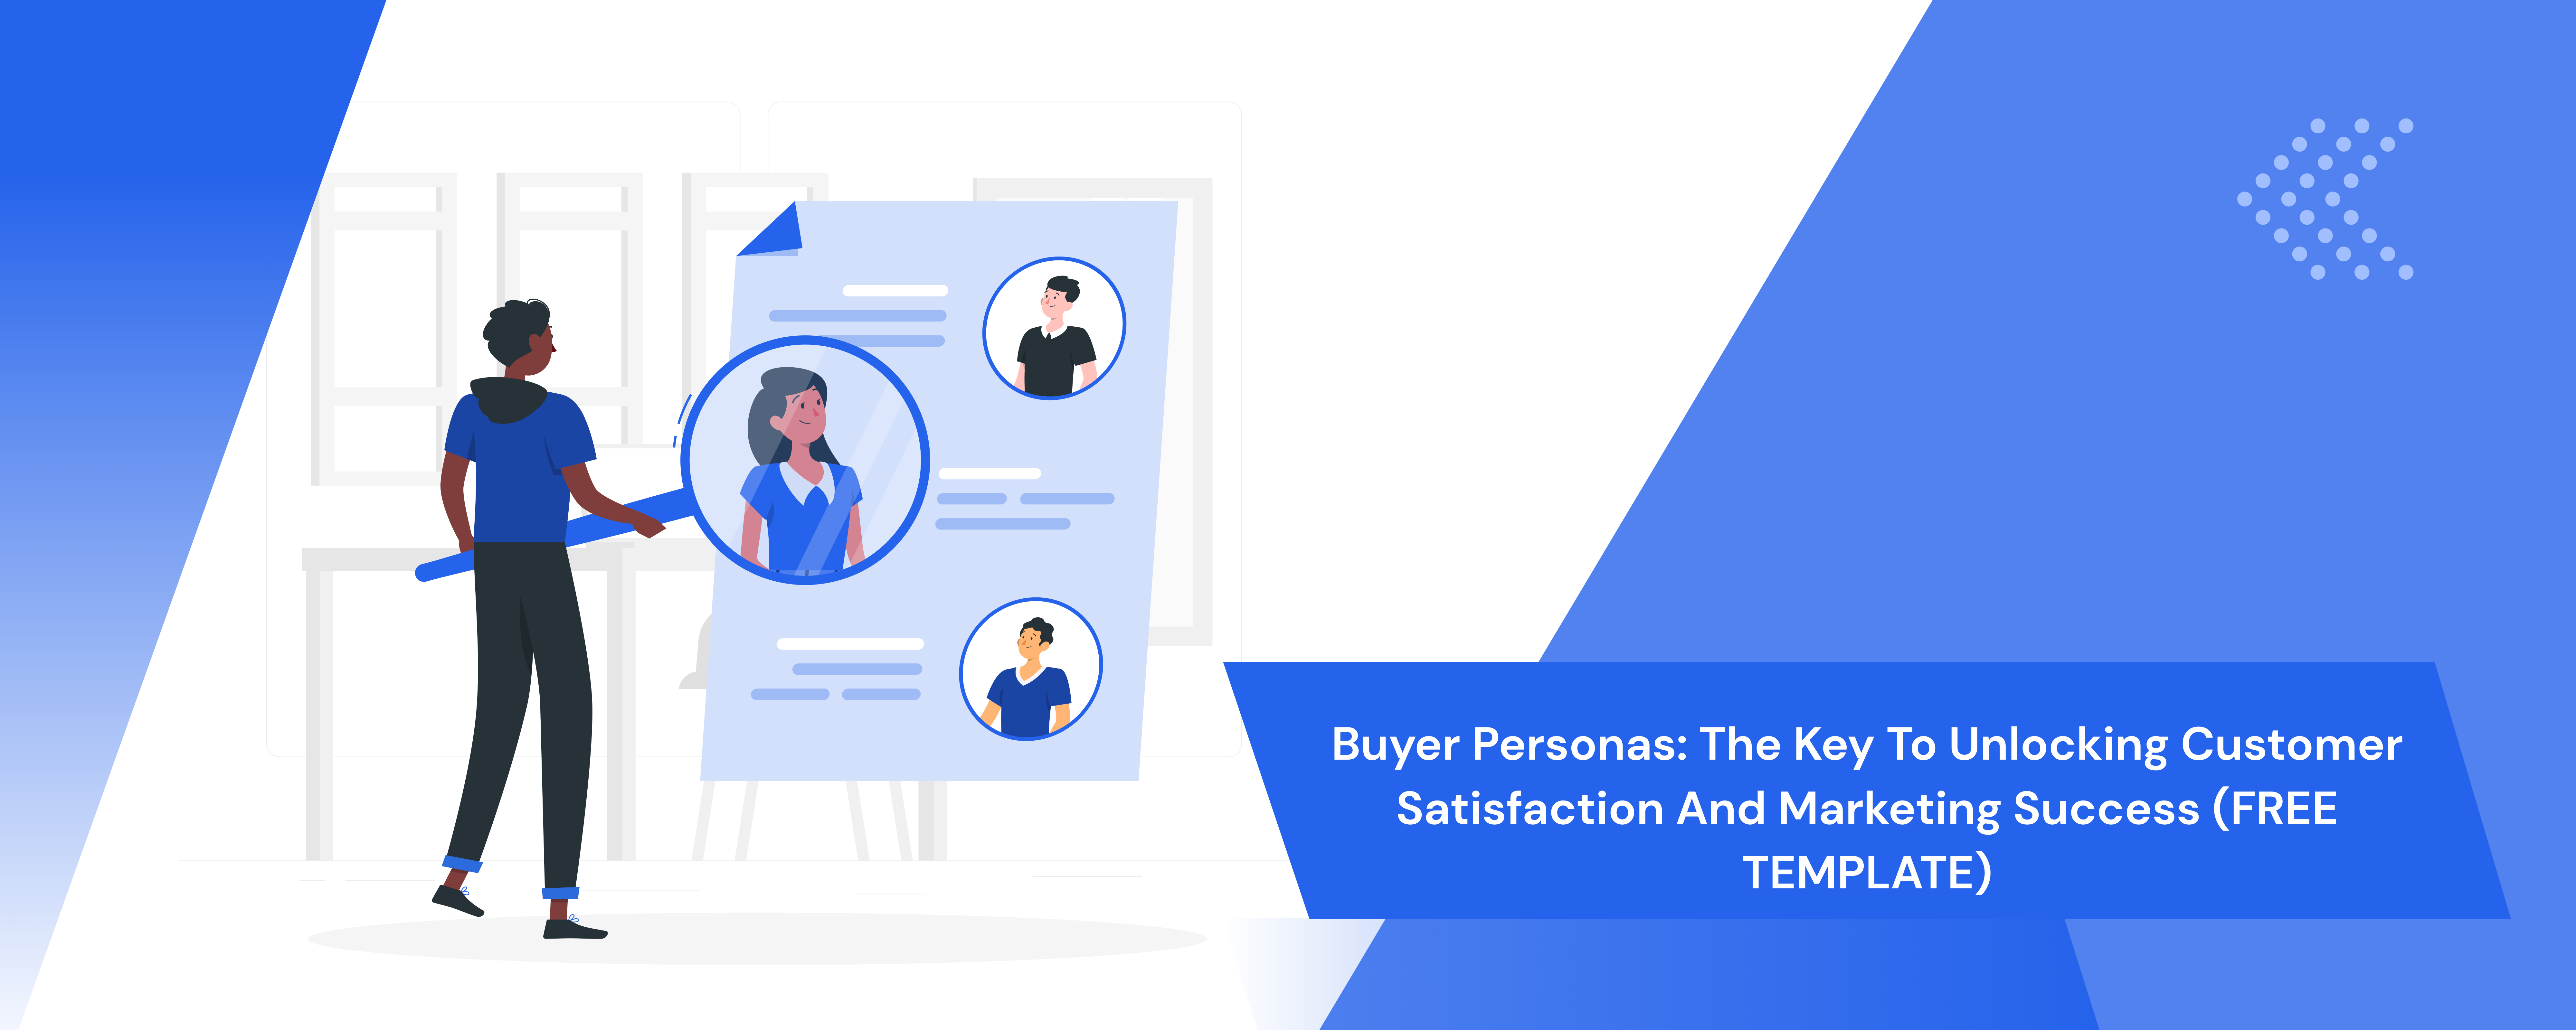 Buyer Personas: The Key to Unlocking Customer Satisfaction and Marketing Success (Free Template)